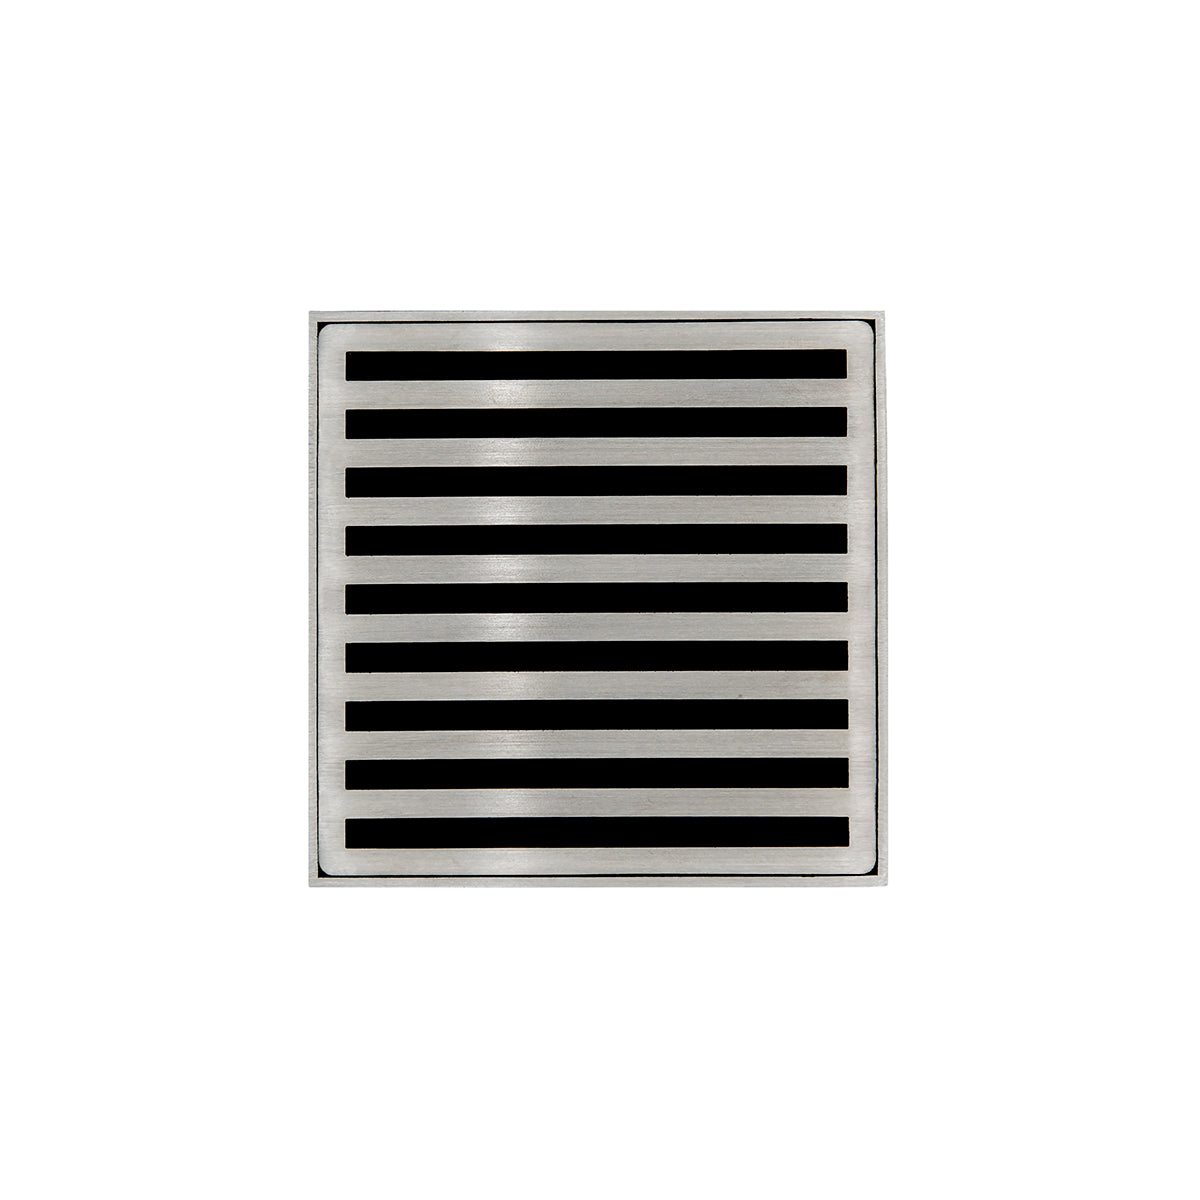 Infinity Drain 4" x 4" ND 4 Premium Center Drain Kit with Lines Pattern Decorative Plate with PVC Drain Body, 2" Outlet